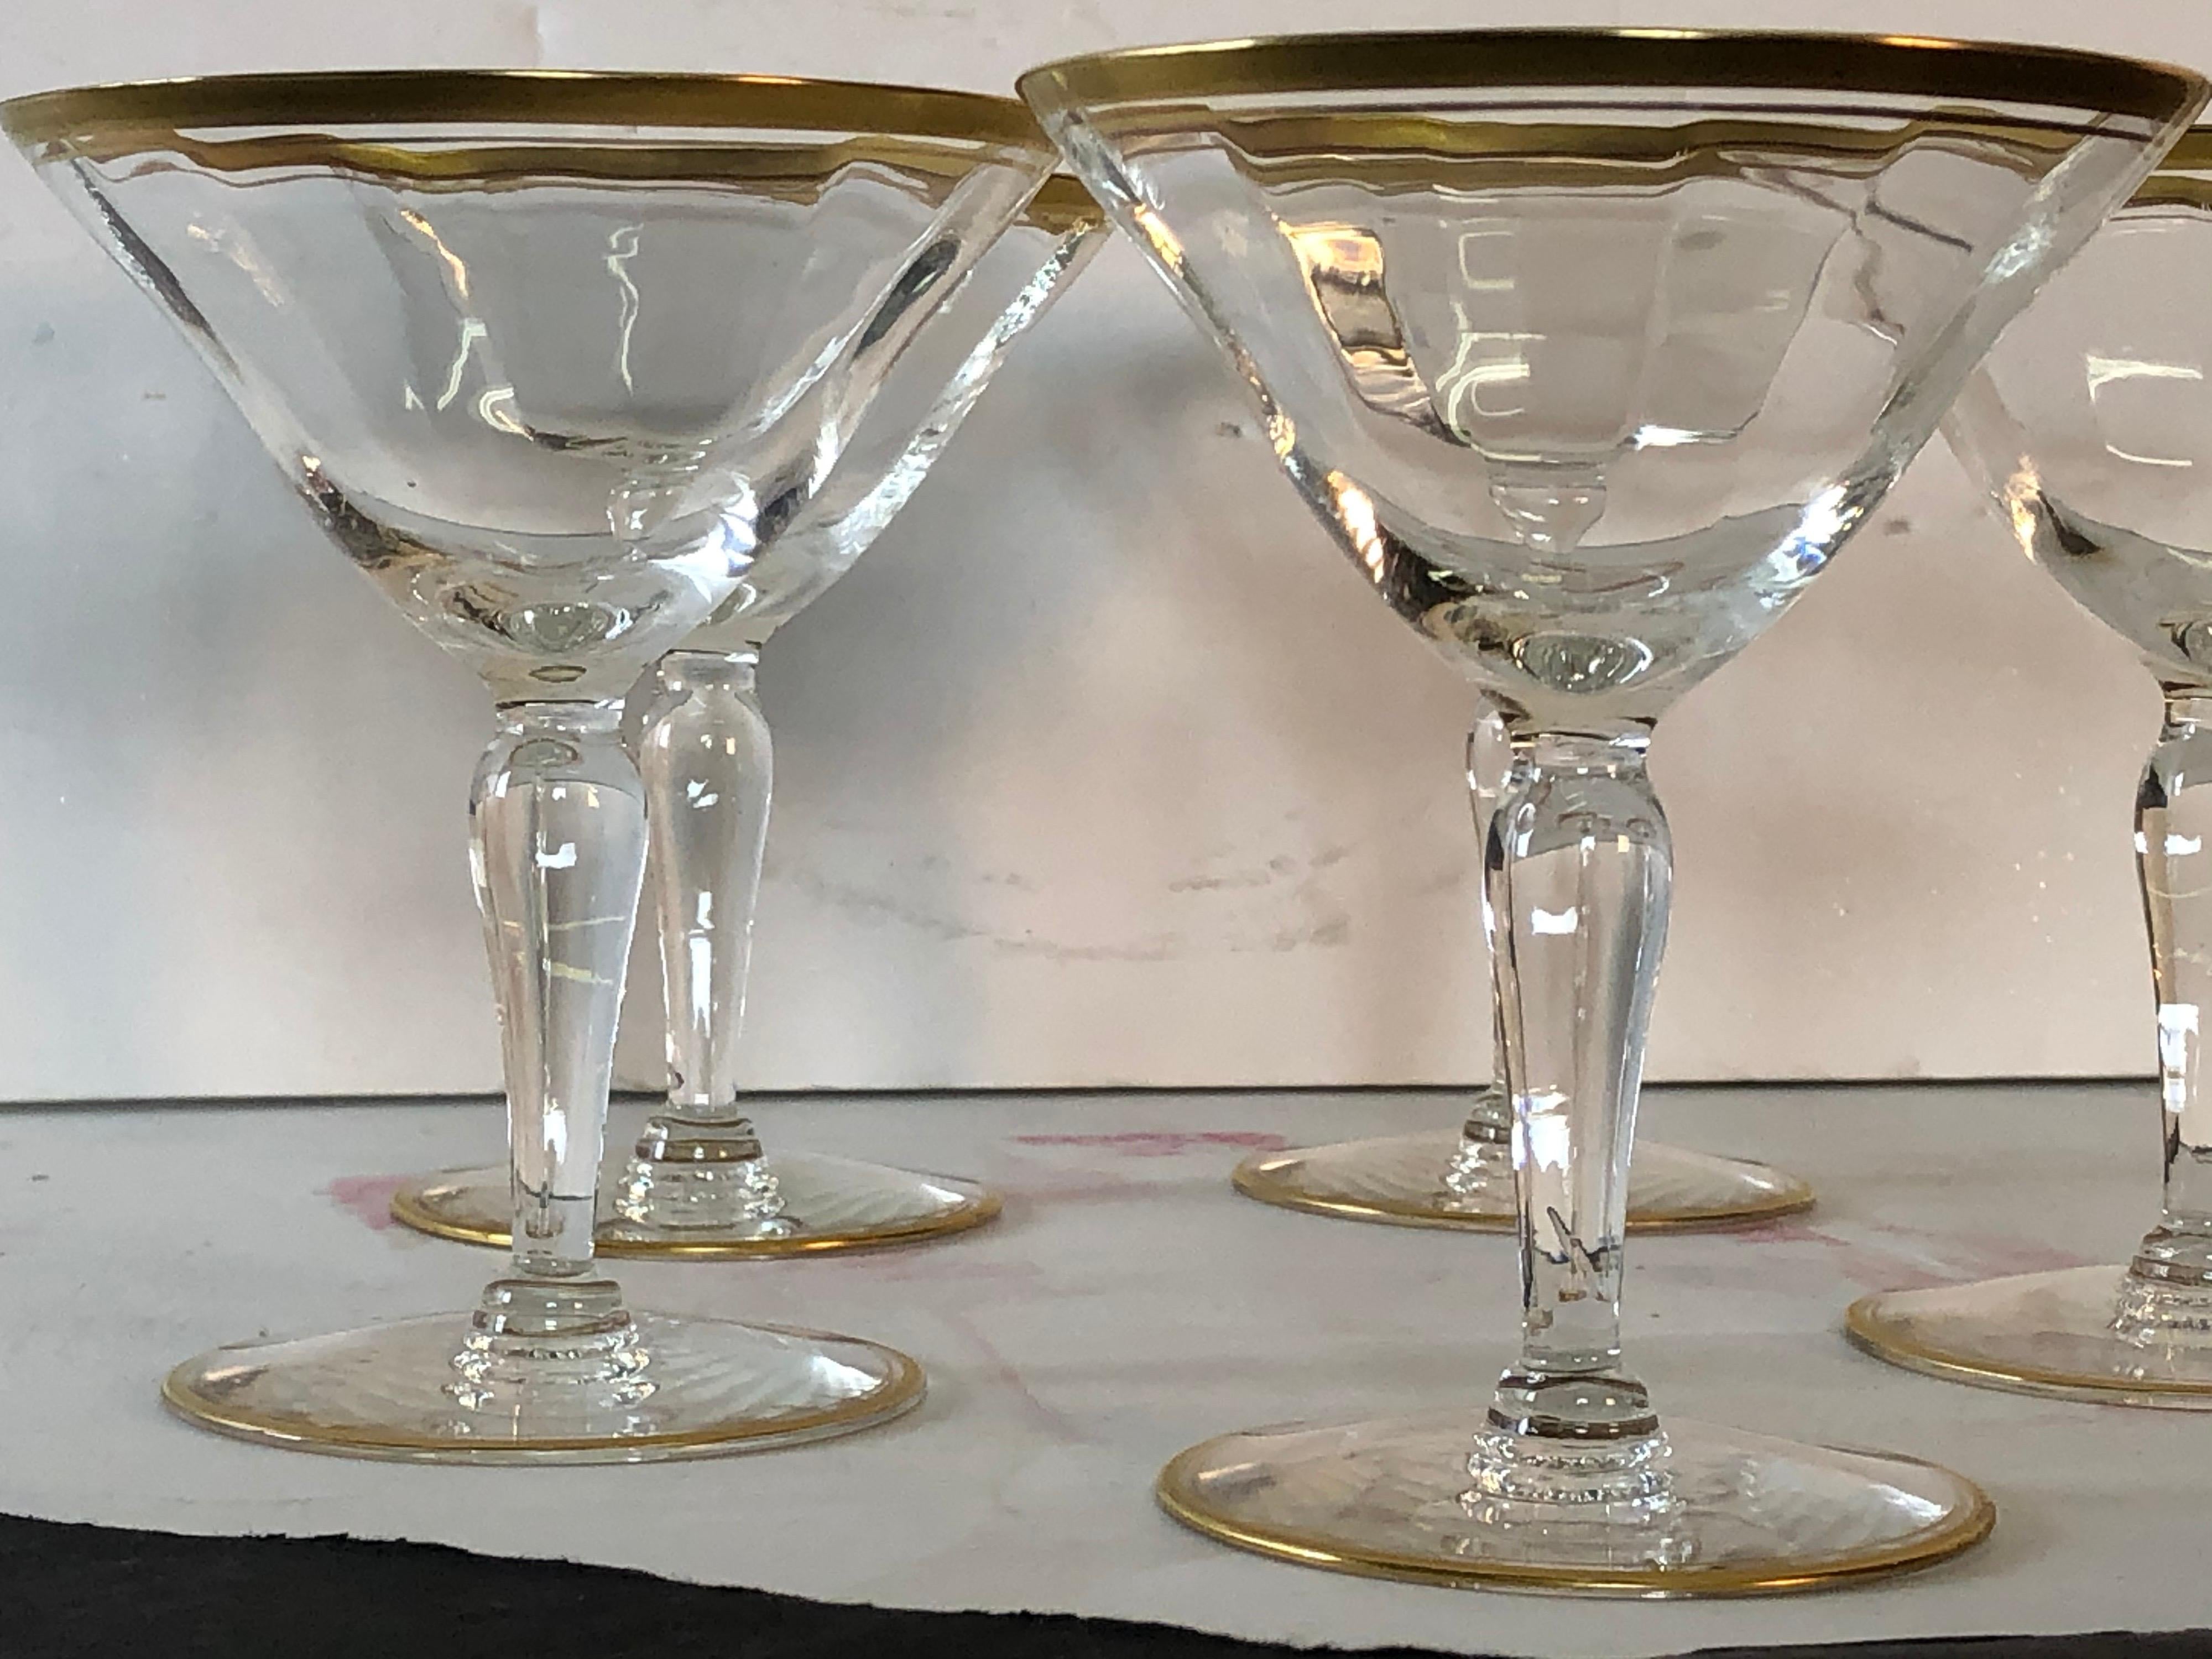 Hollywood Regency 1960s Double Gold Rim Glass Coupe Stems, Set of 5